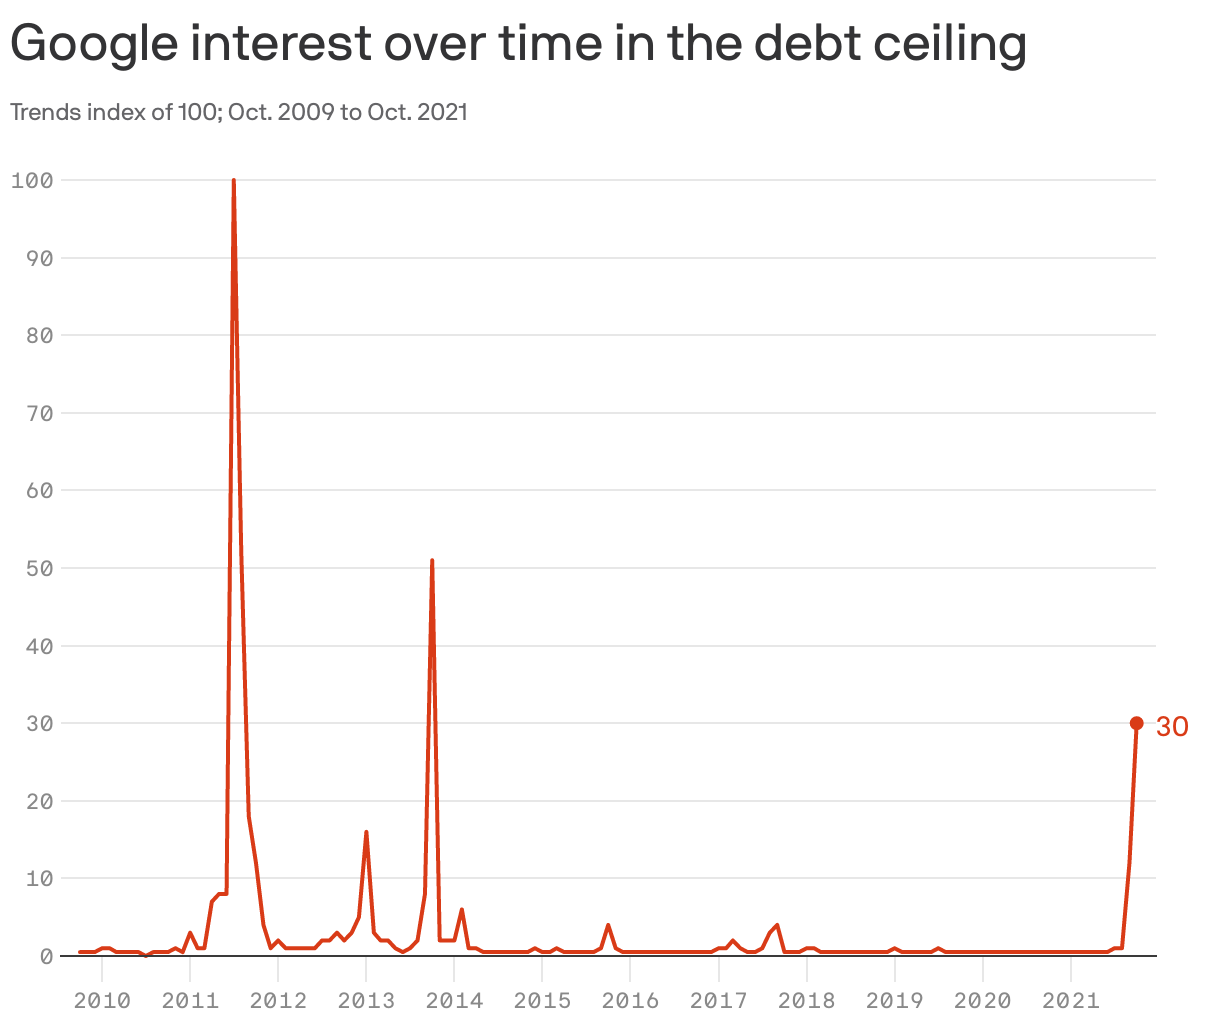 Google interest over time in the debt ceiling